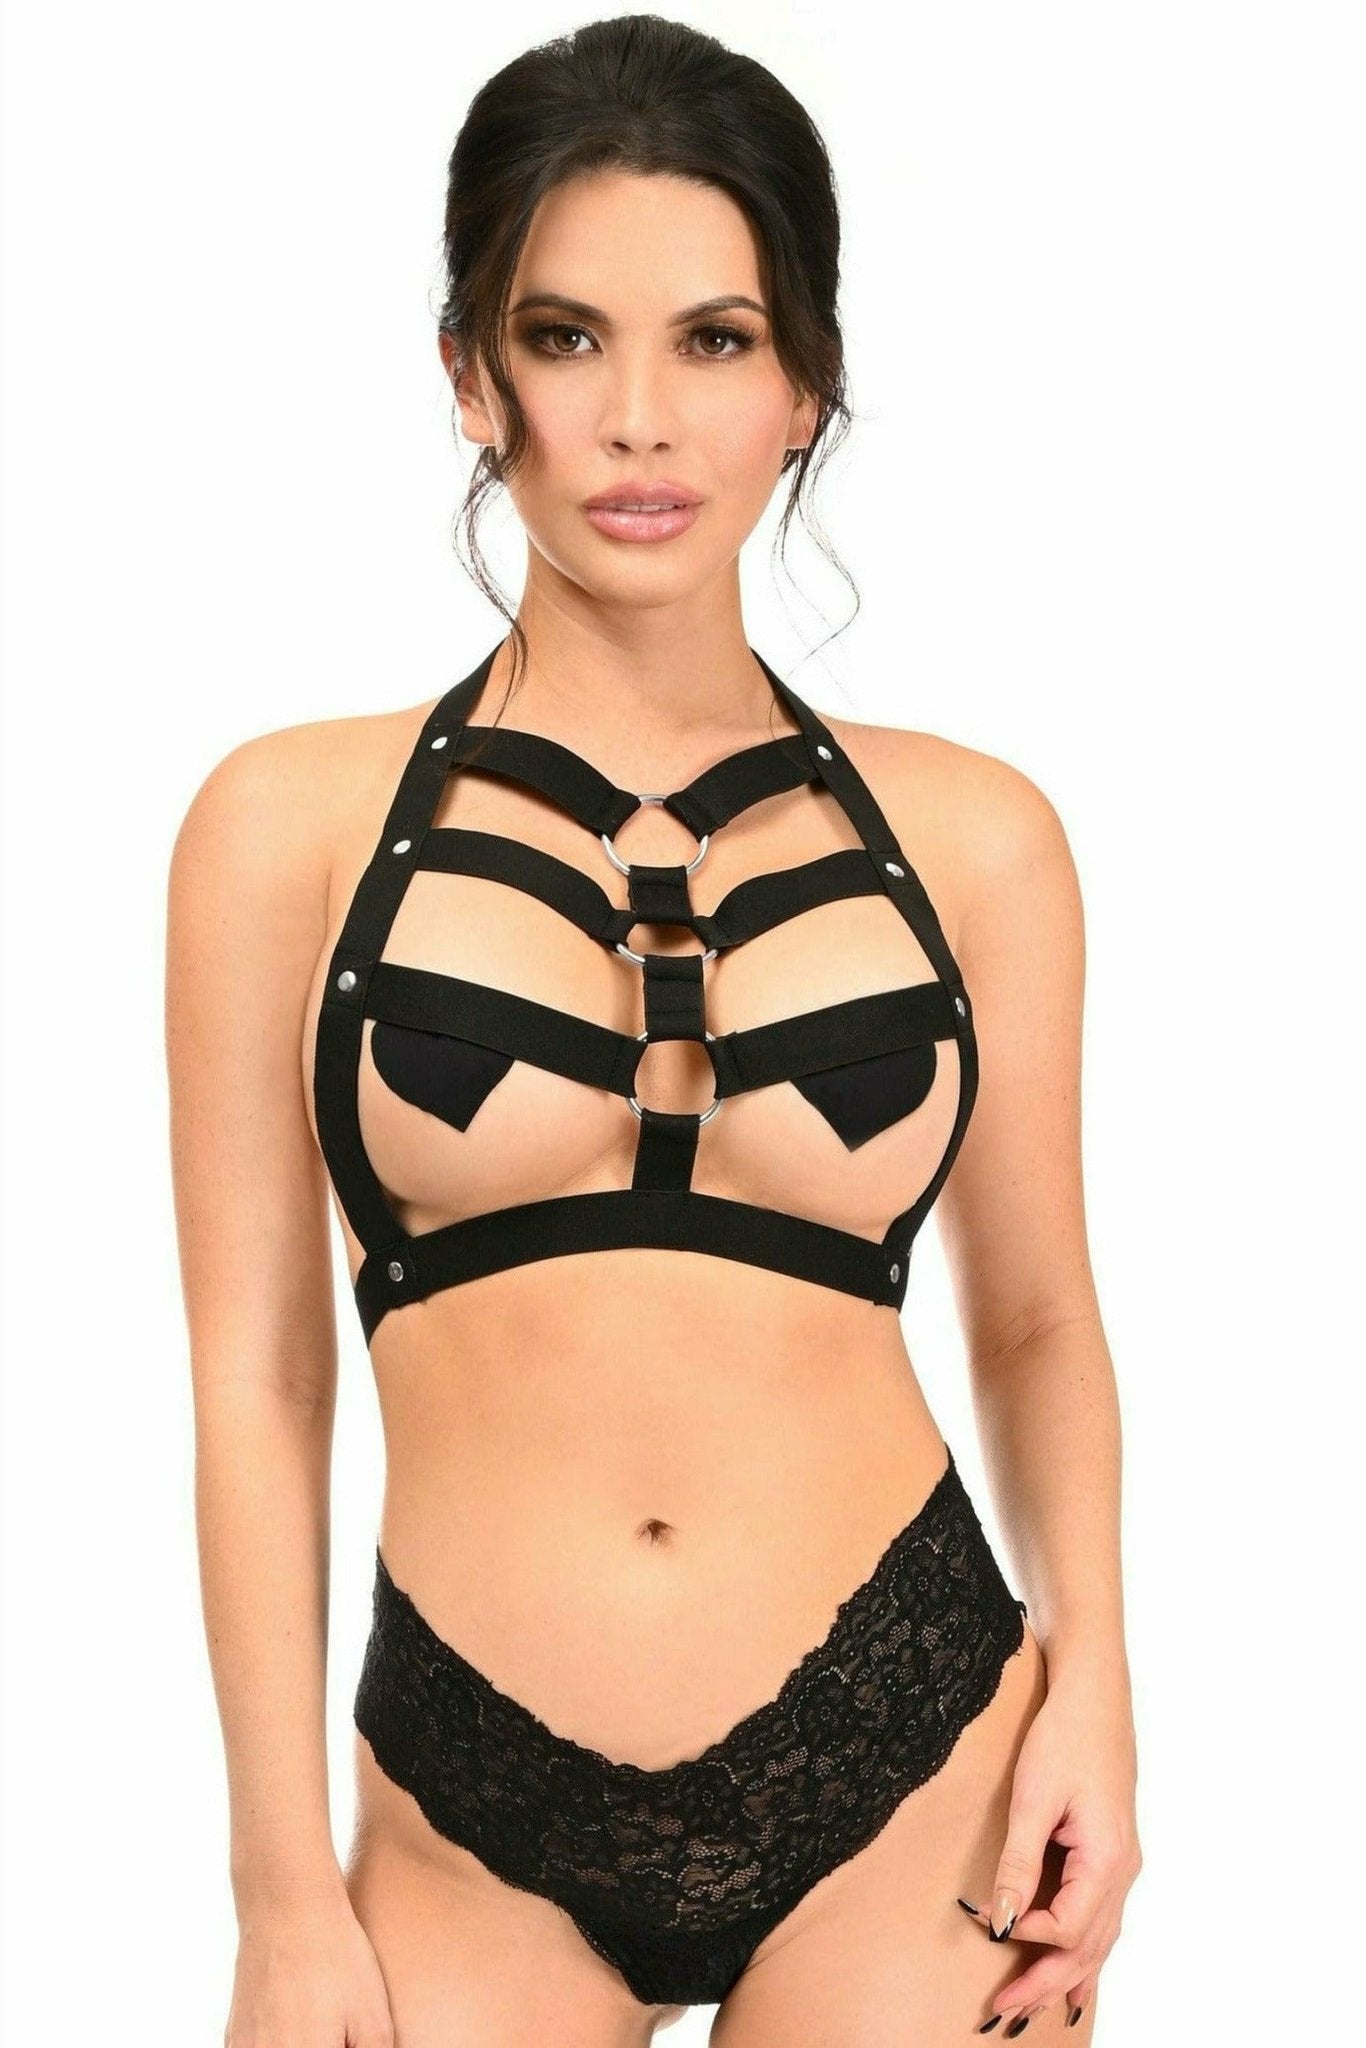 Black Stretchy Body Harness with Silver Hardware Musotica.com